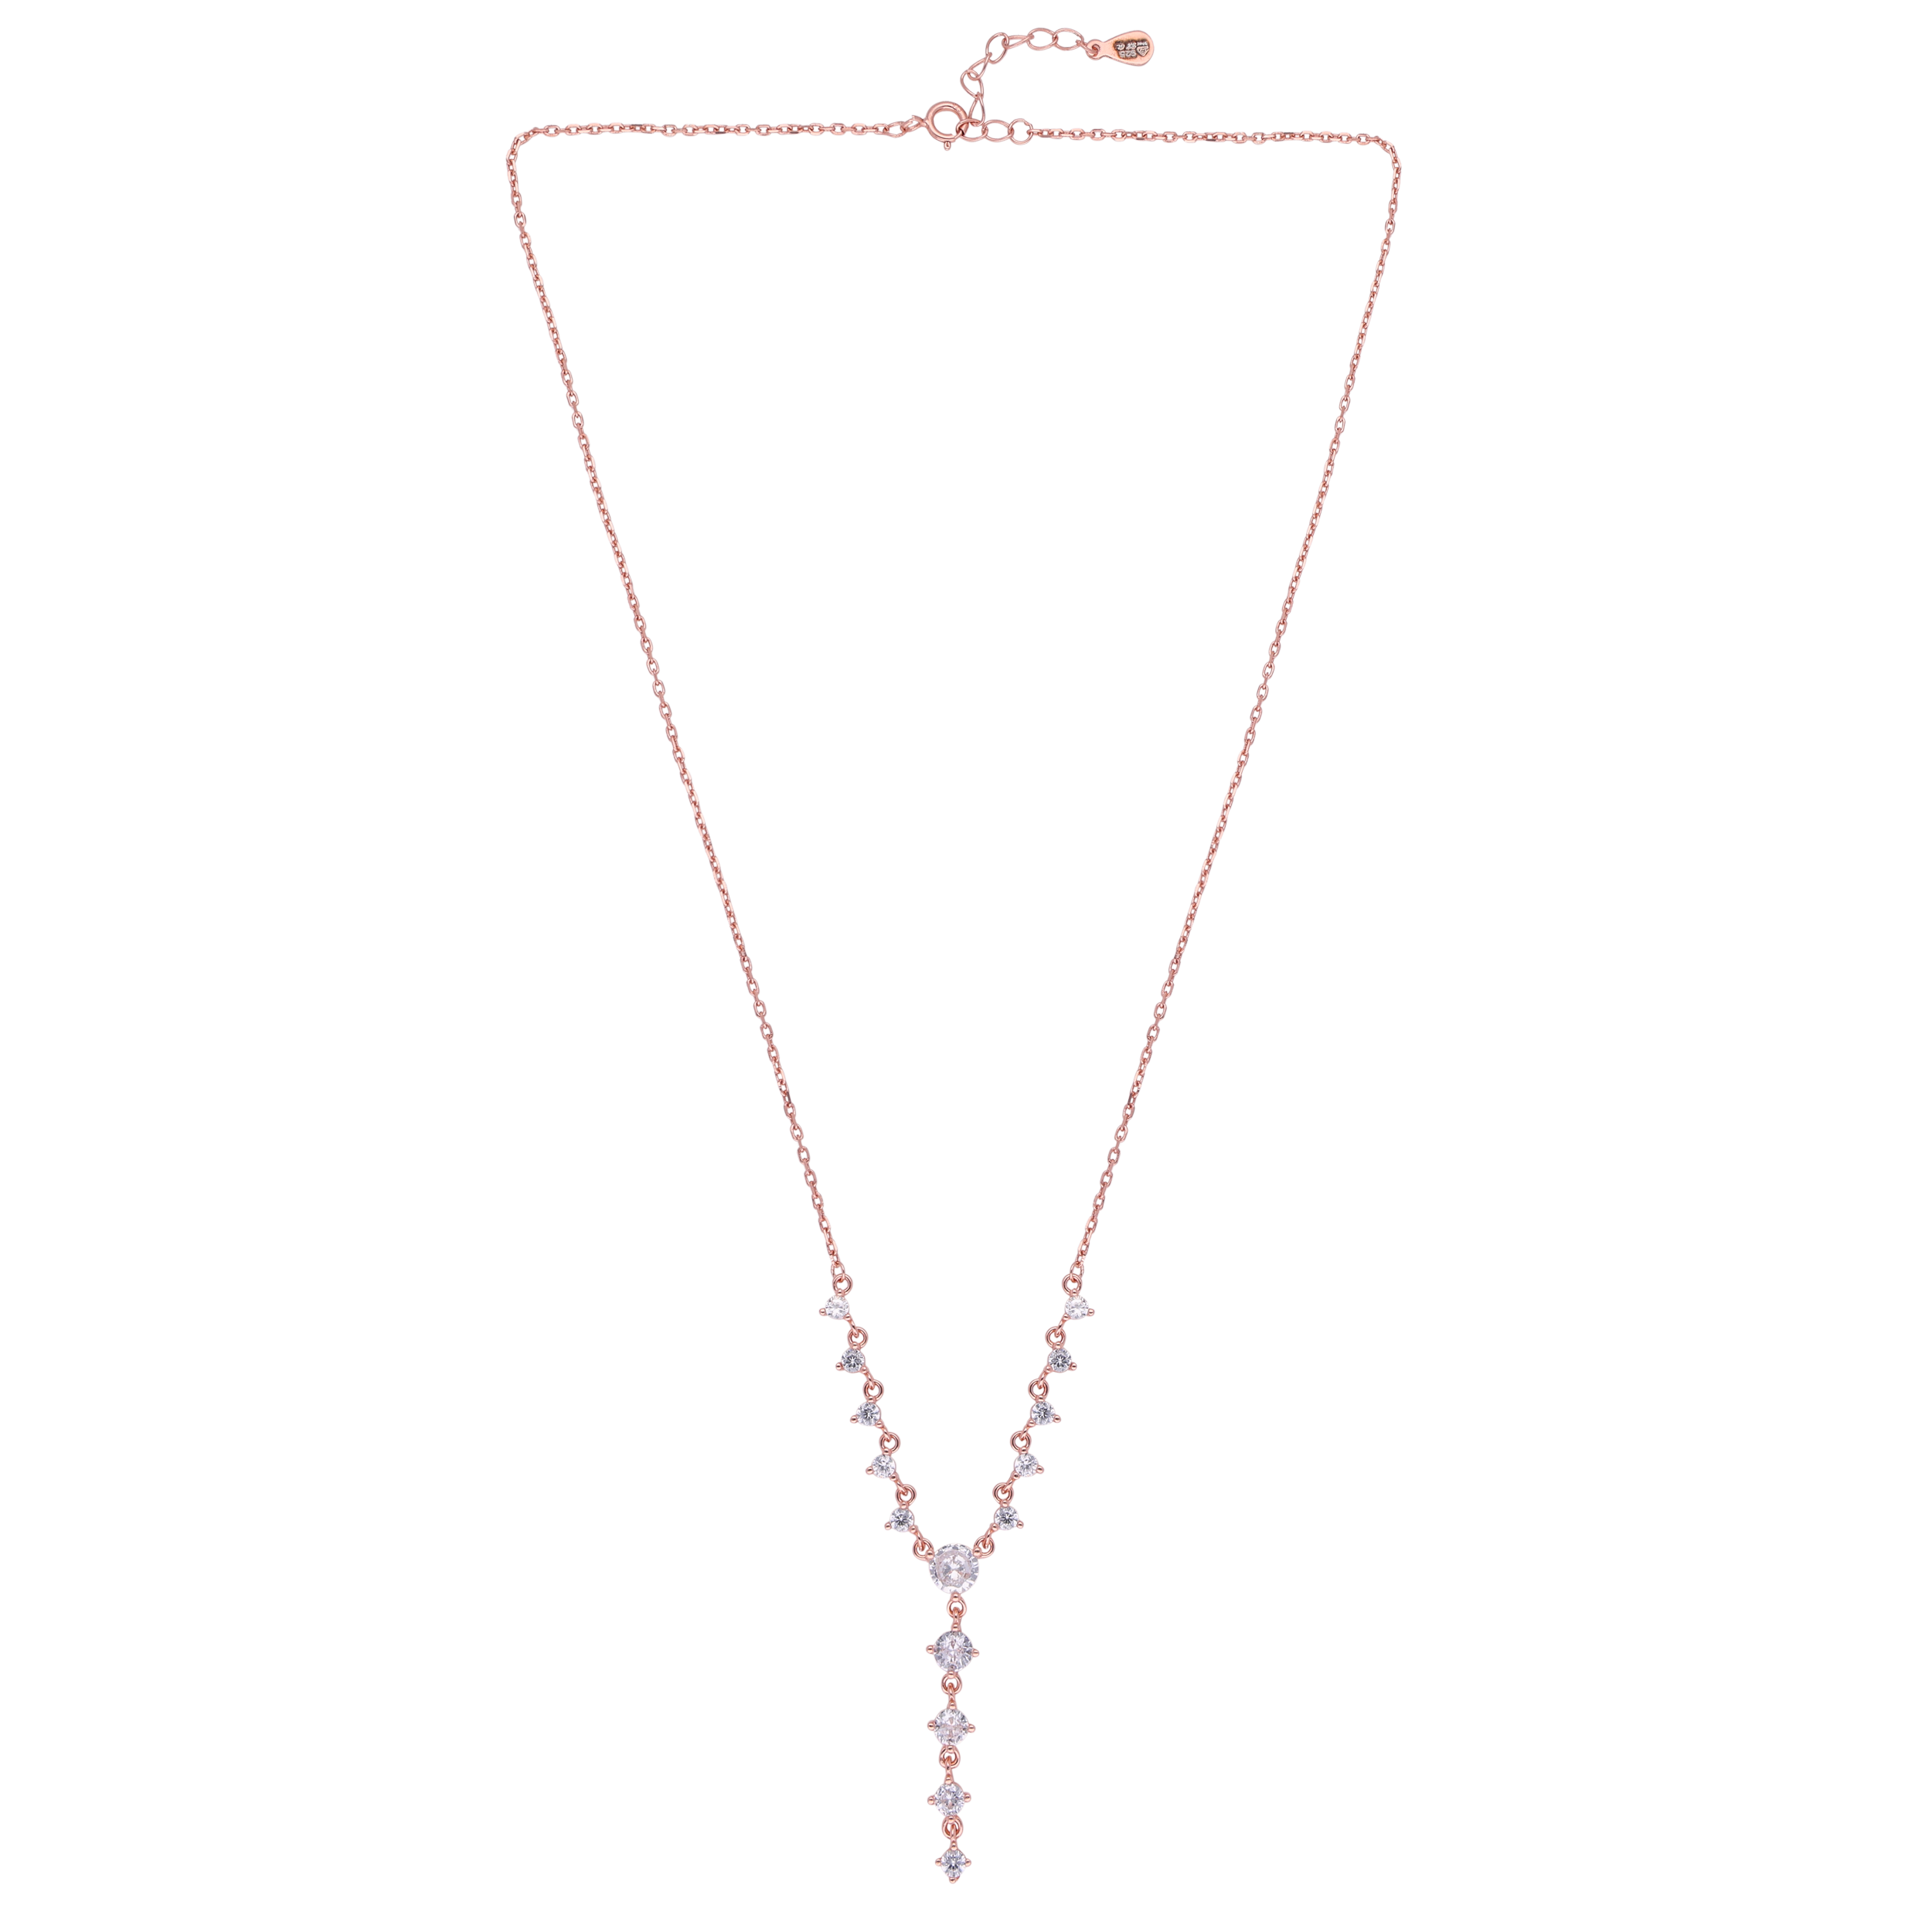 Rose Gold Sterling Silver Chain | SKU: 0019271903, 0019282008, 0019281889